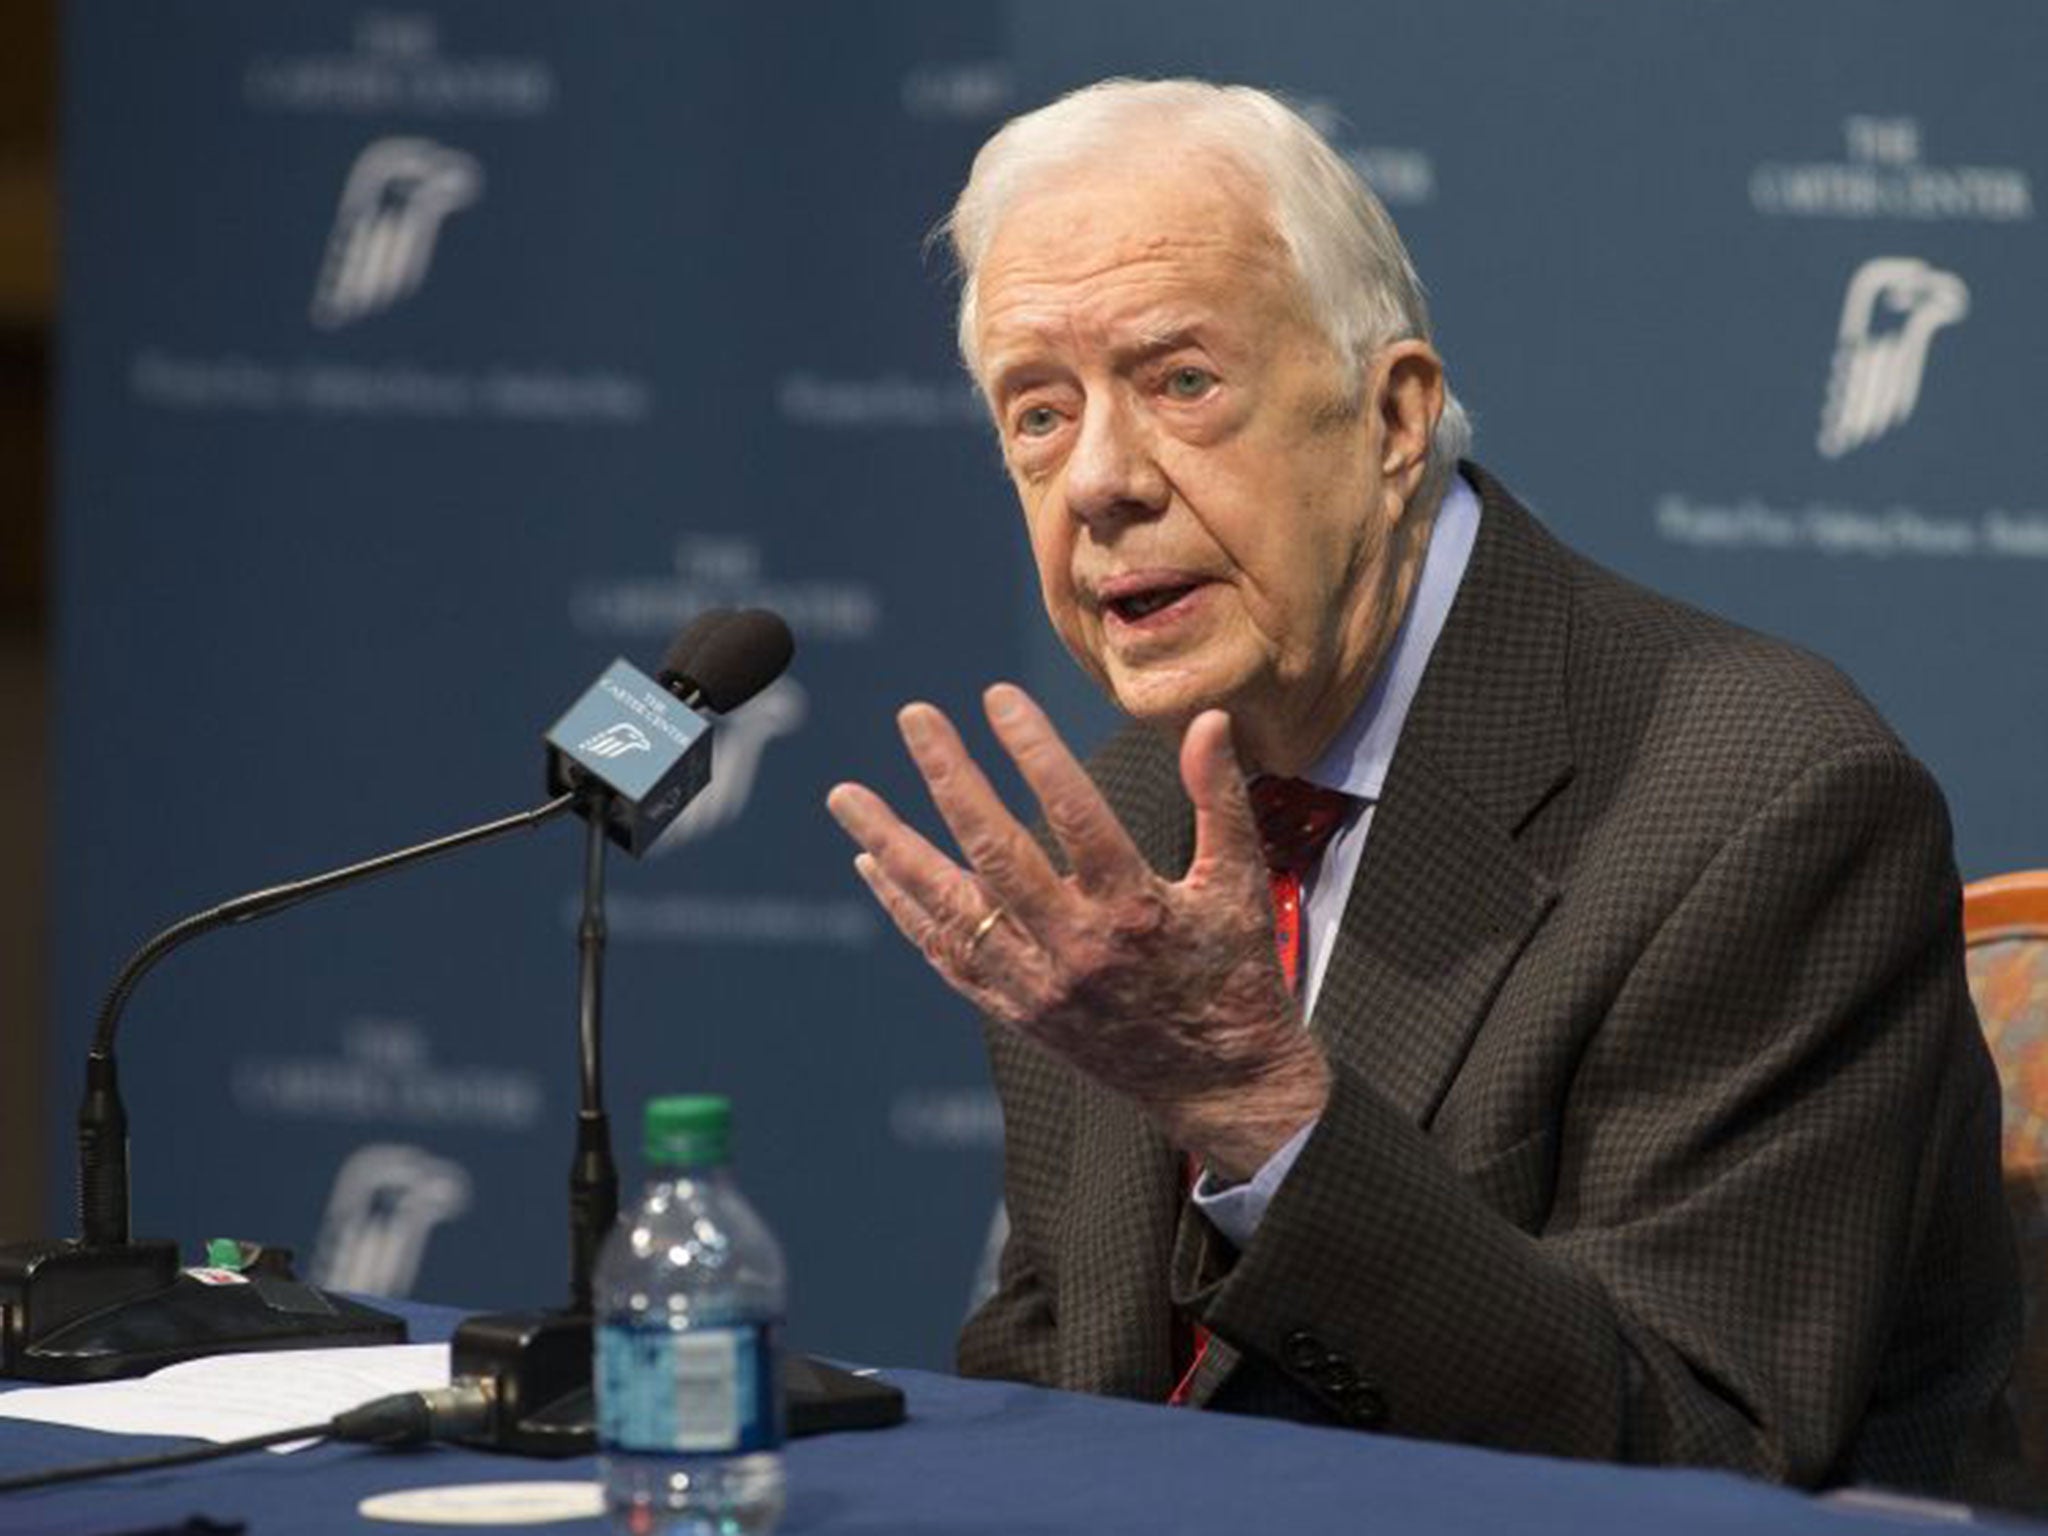 Former President Jimmy Carter talks about his cancer diagnosis during a news conference at The Carter Center in Atlanta